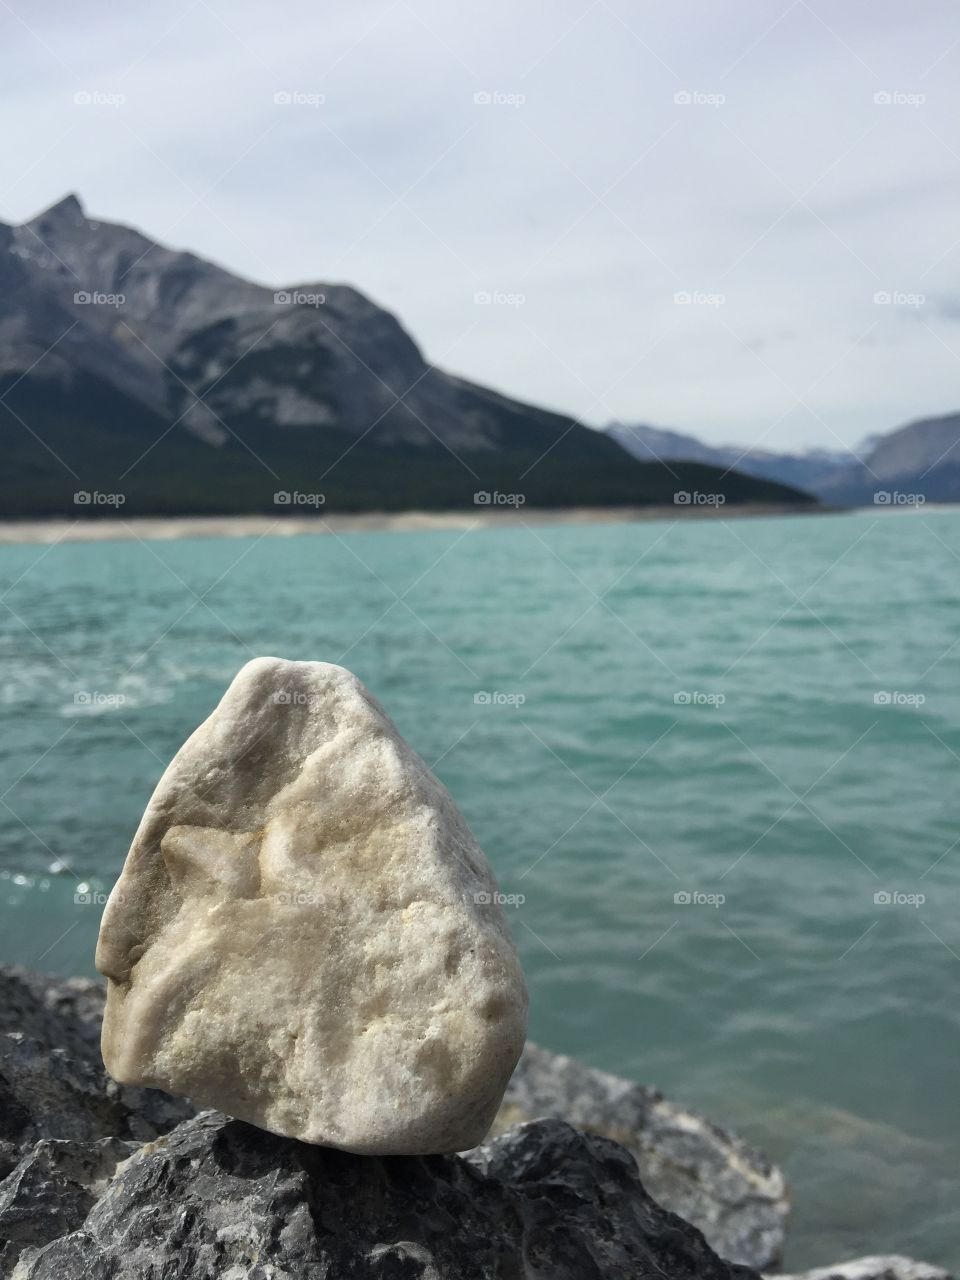 This rock stood out among the rest.